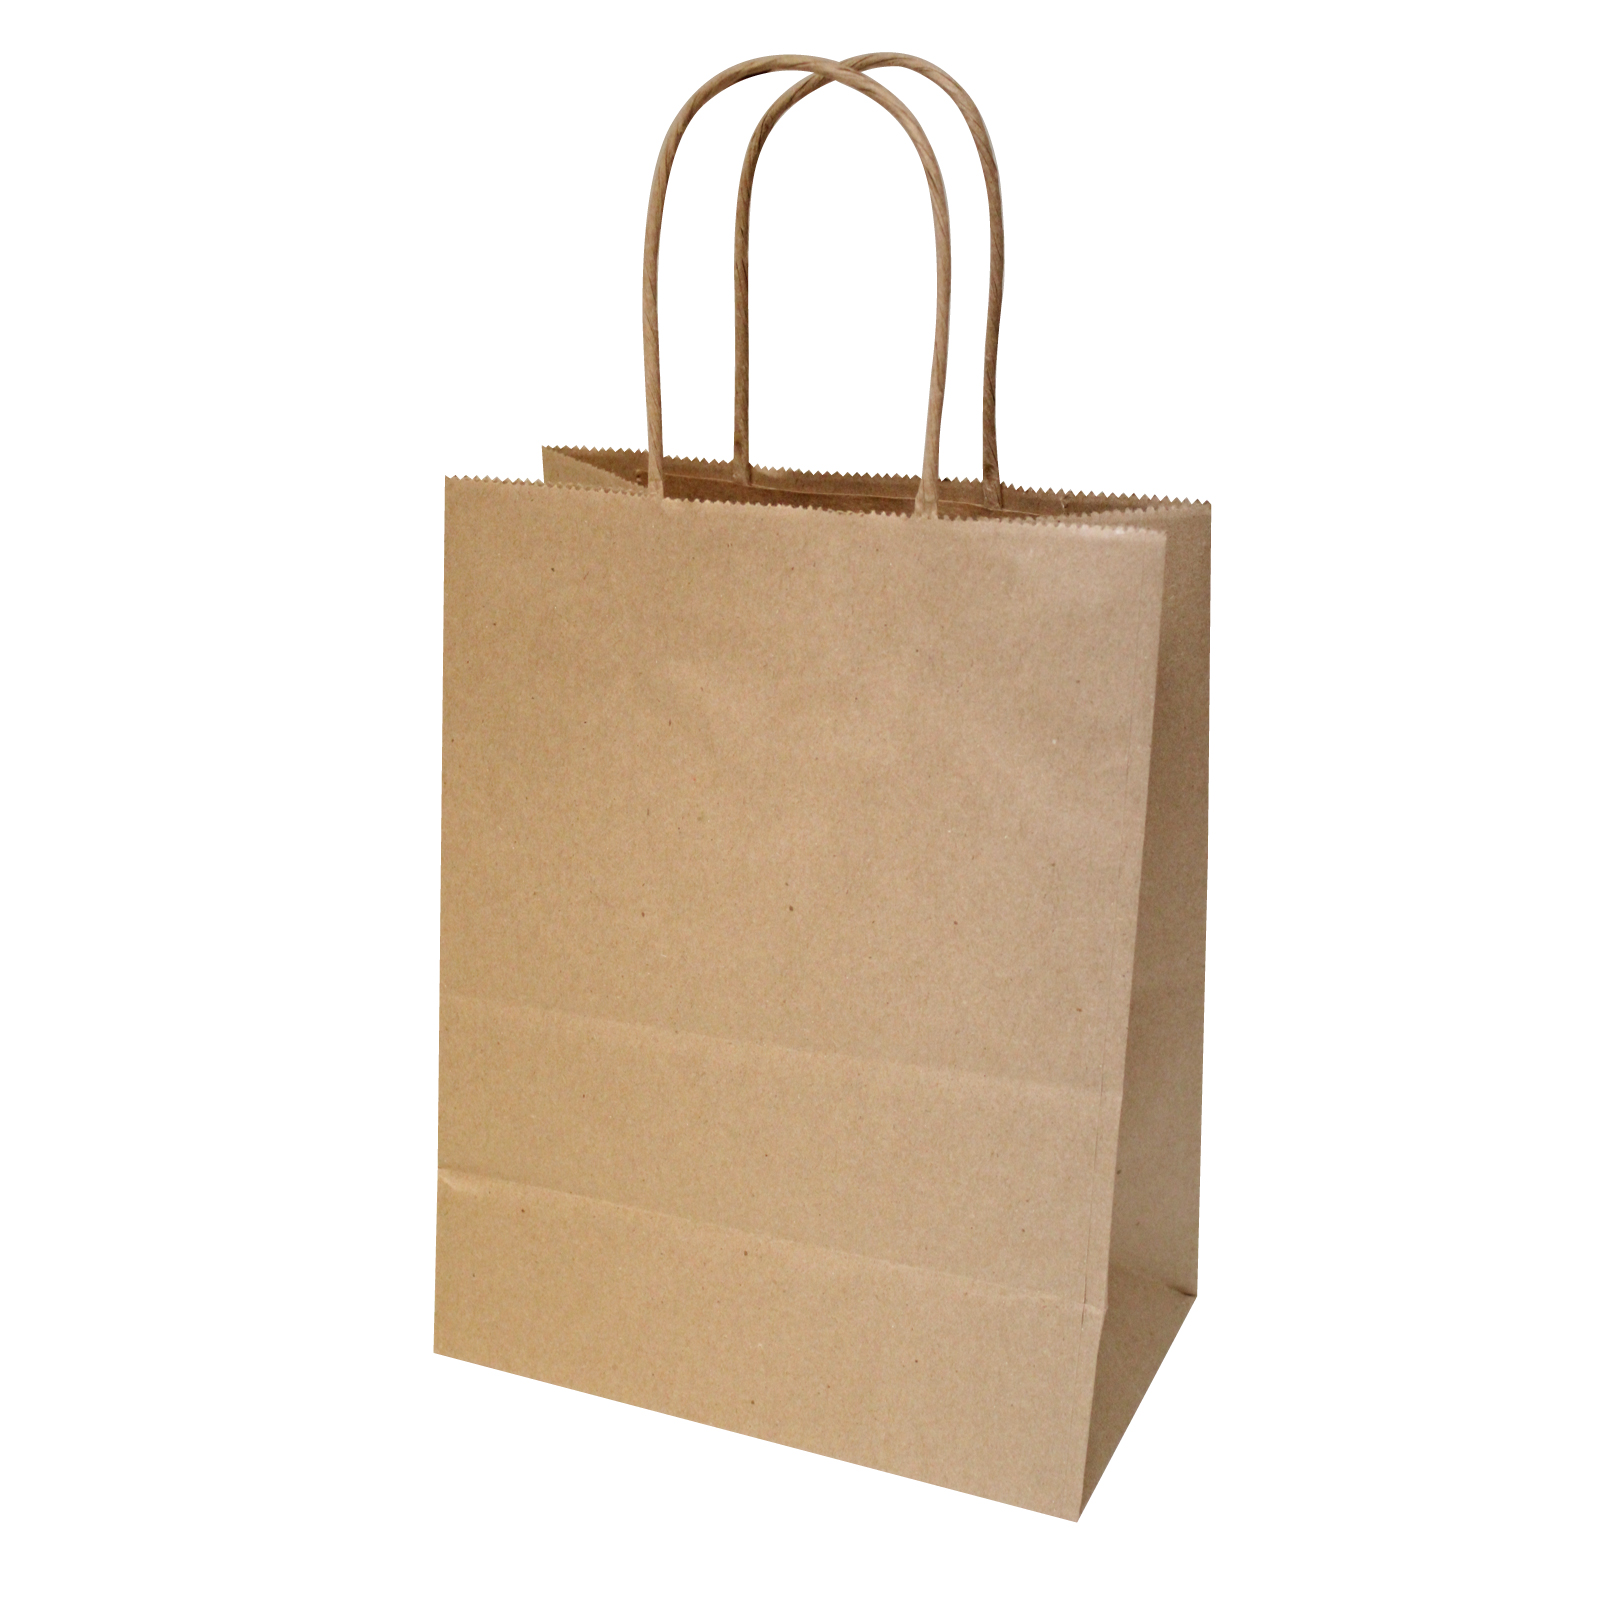 8"x4.75"x10", 50 Piece, Natural Brown Kraft Paper Bags, Shopping, Mechandise, Party, Gift Bags - image 2 of 4